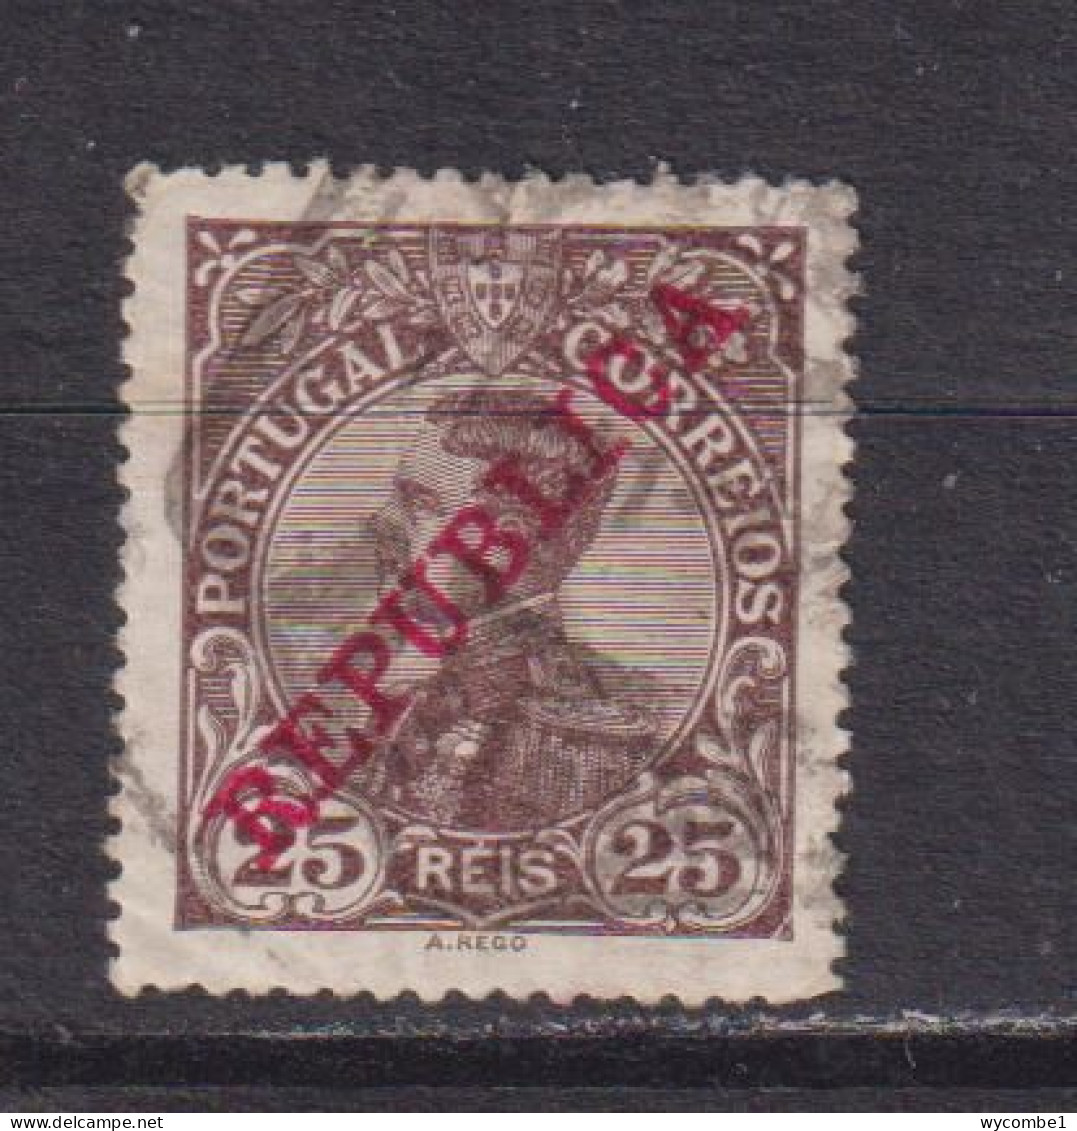 PORTUGAL - 1910  Republica 25r Used As Scan - Used Stamps